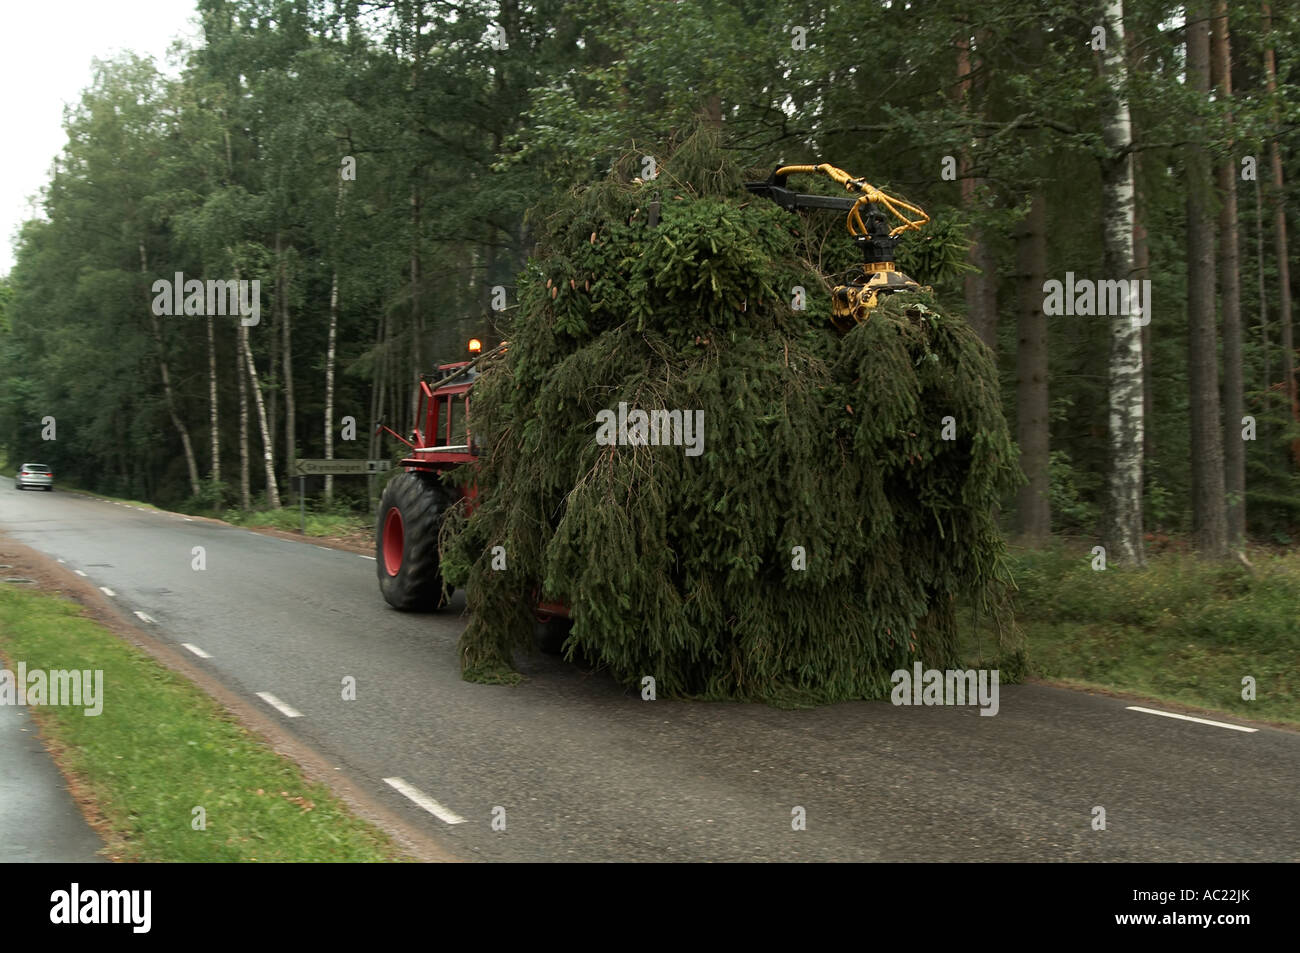 tree, felling, timber, surgeon, tractor, leaves, green, wide, load, logging, industry, Stock Photo